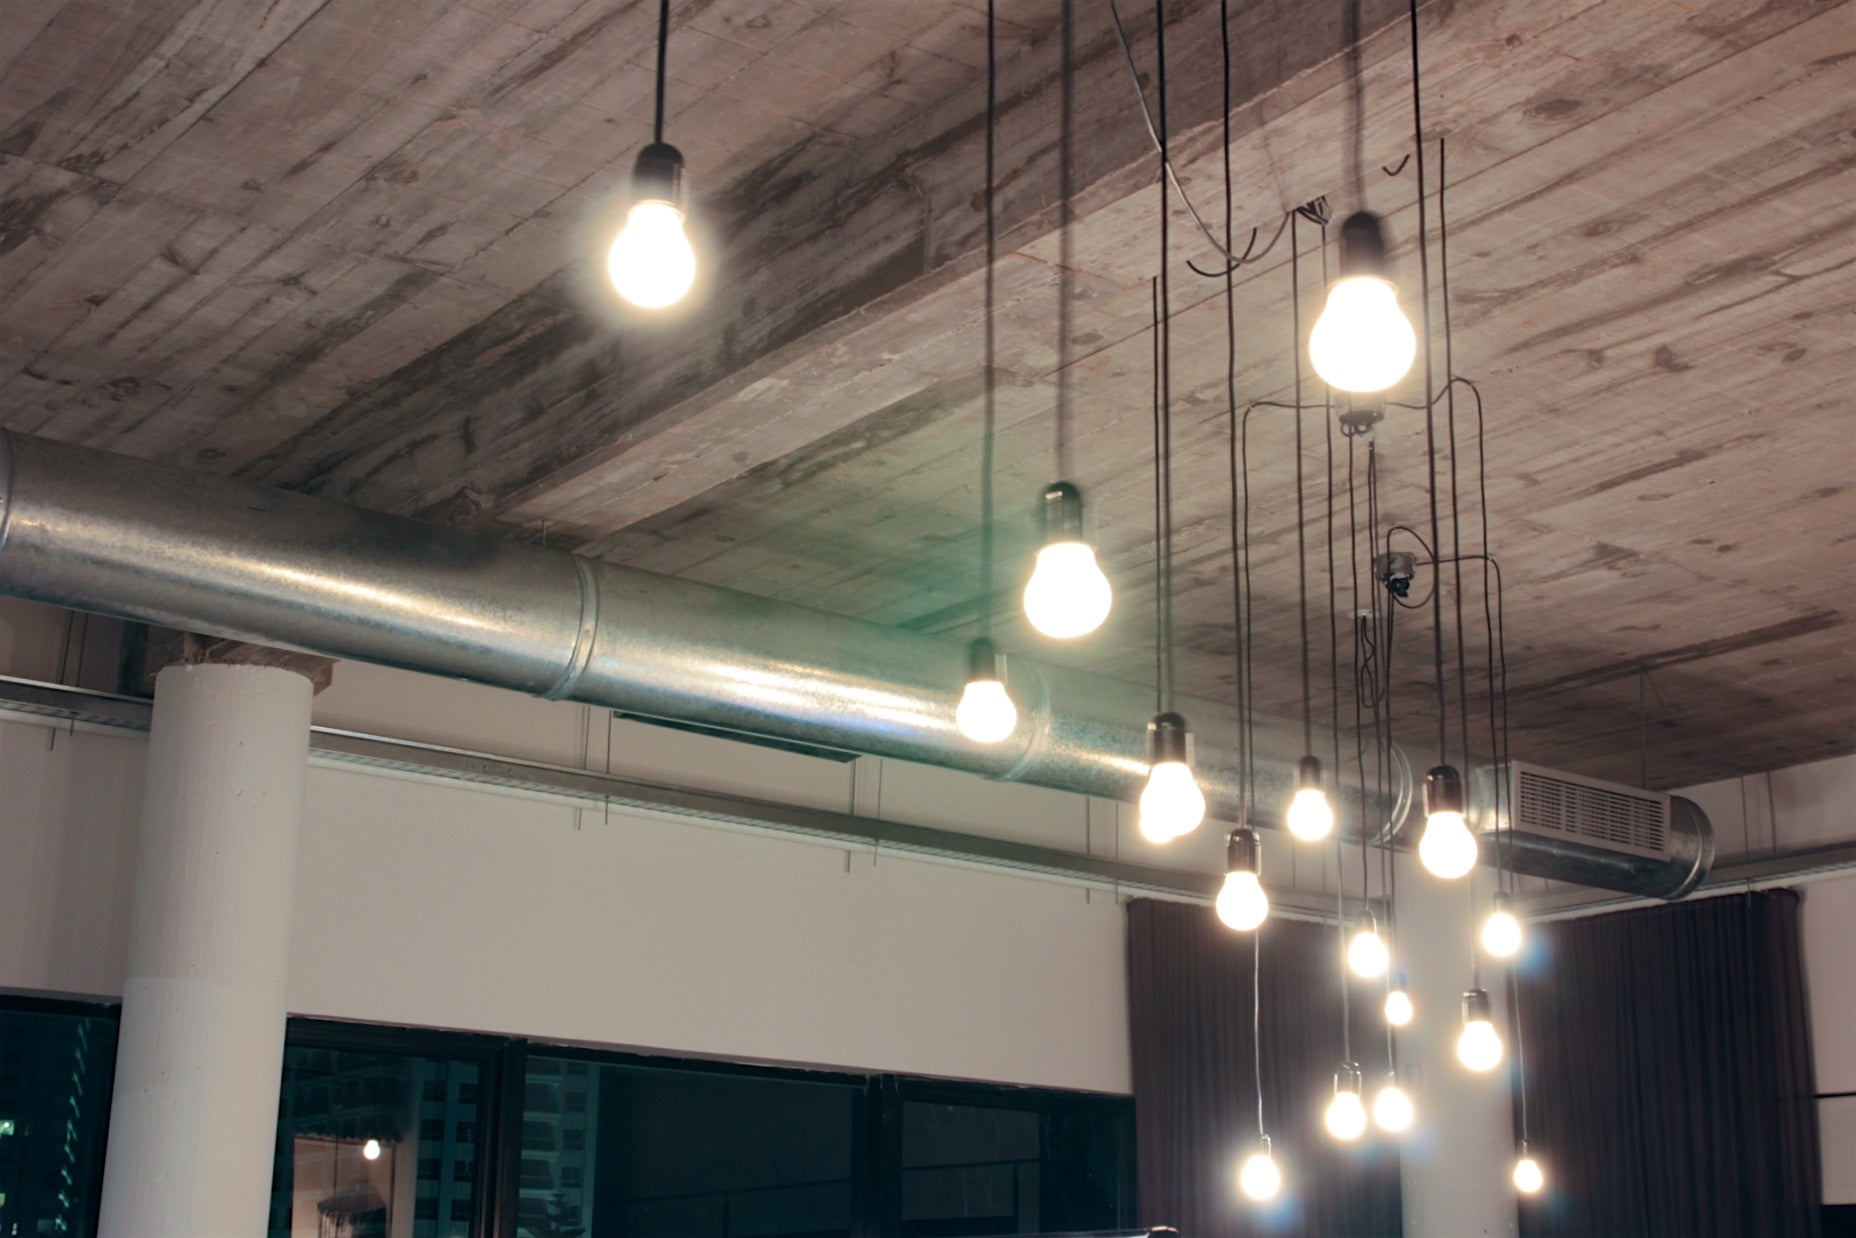 Custom Industrial Light Fixture Design for an industrial designed office space.